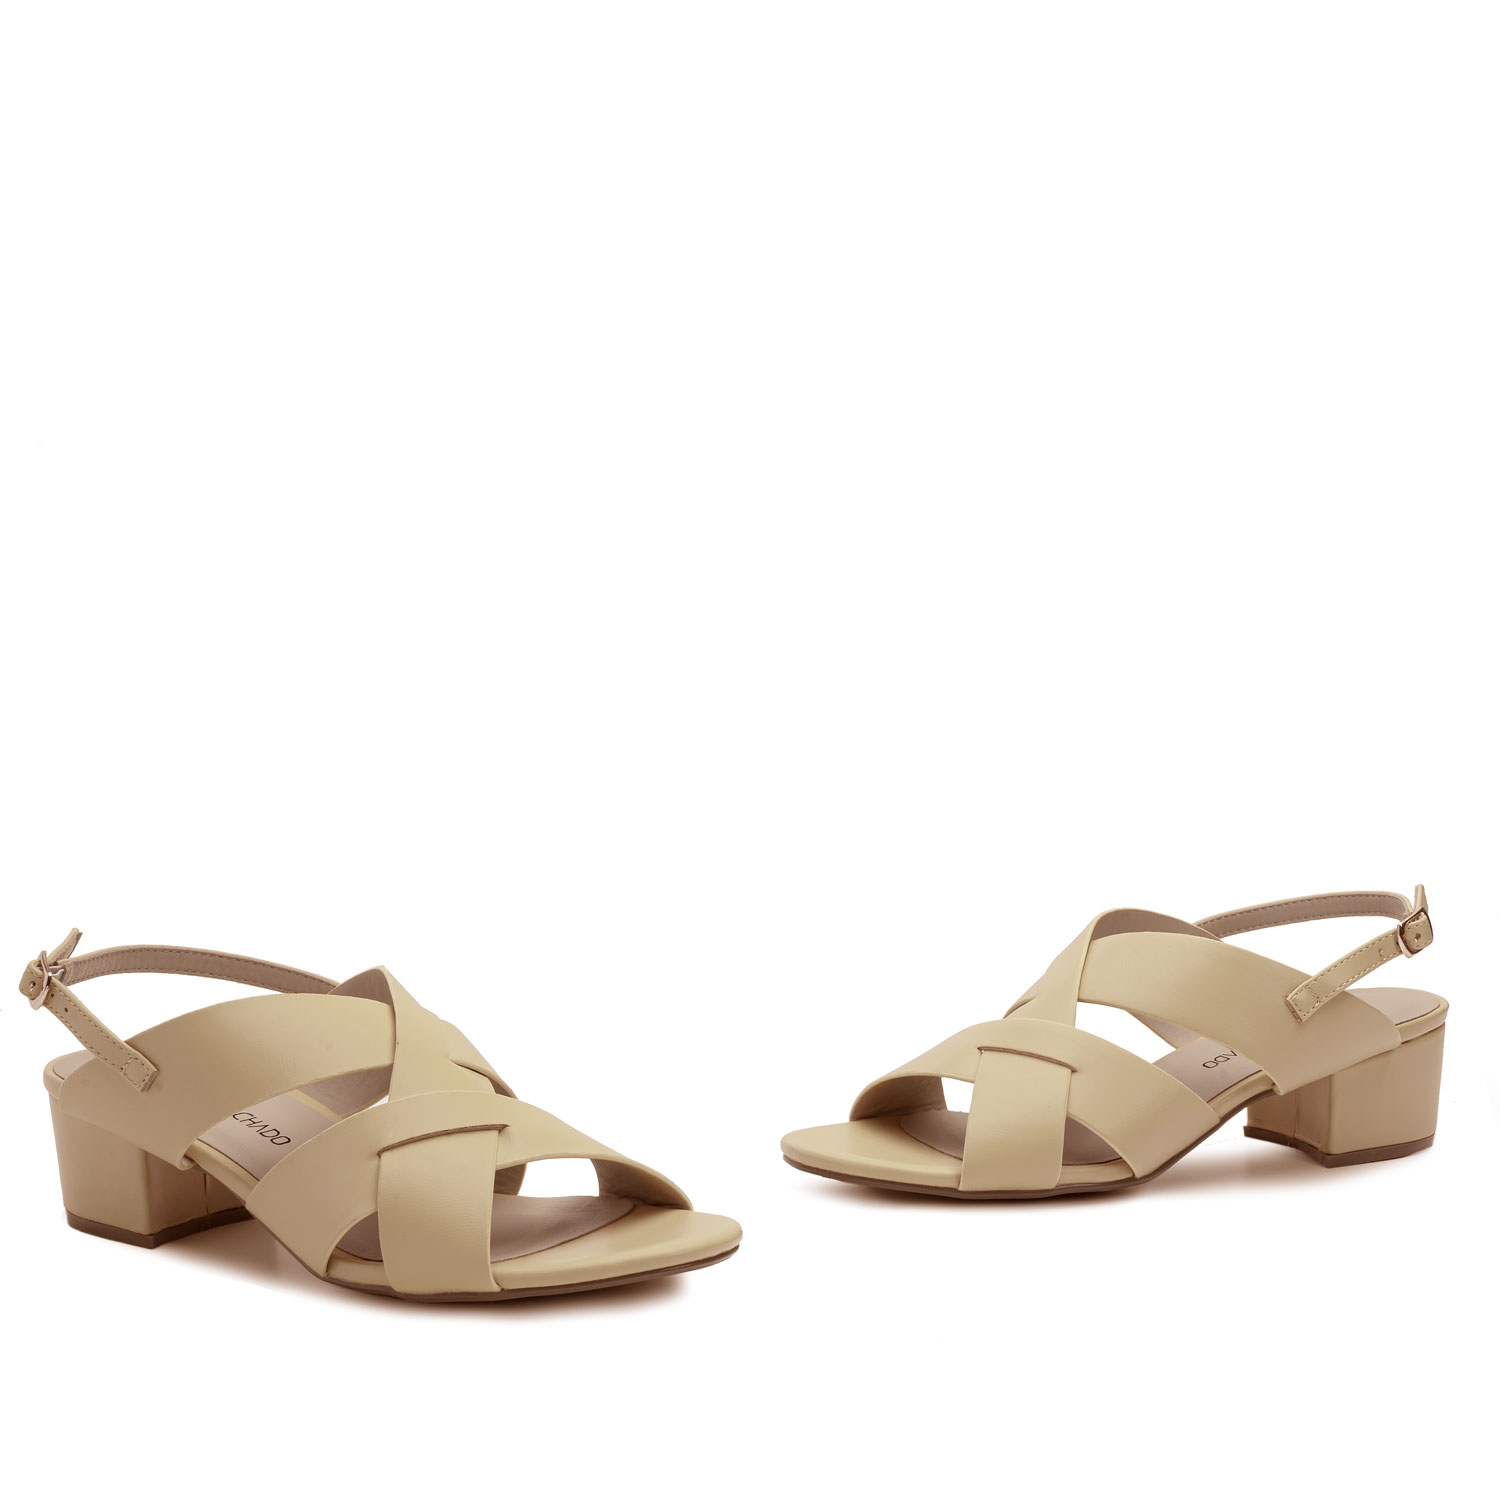 Cream Colored Faux Leather Sandals 